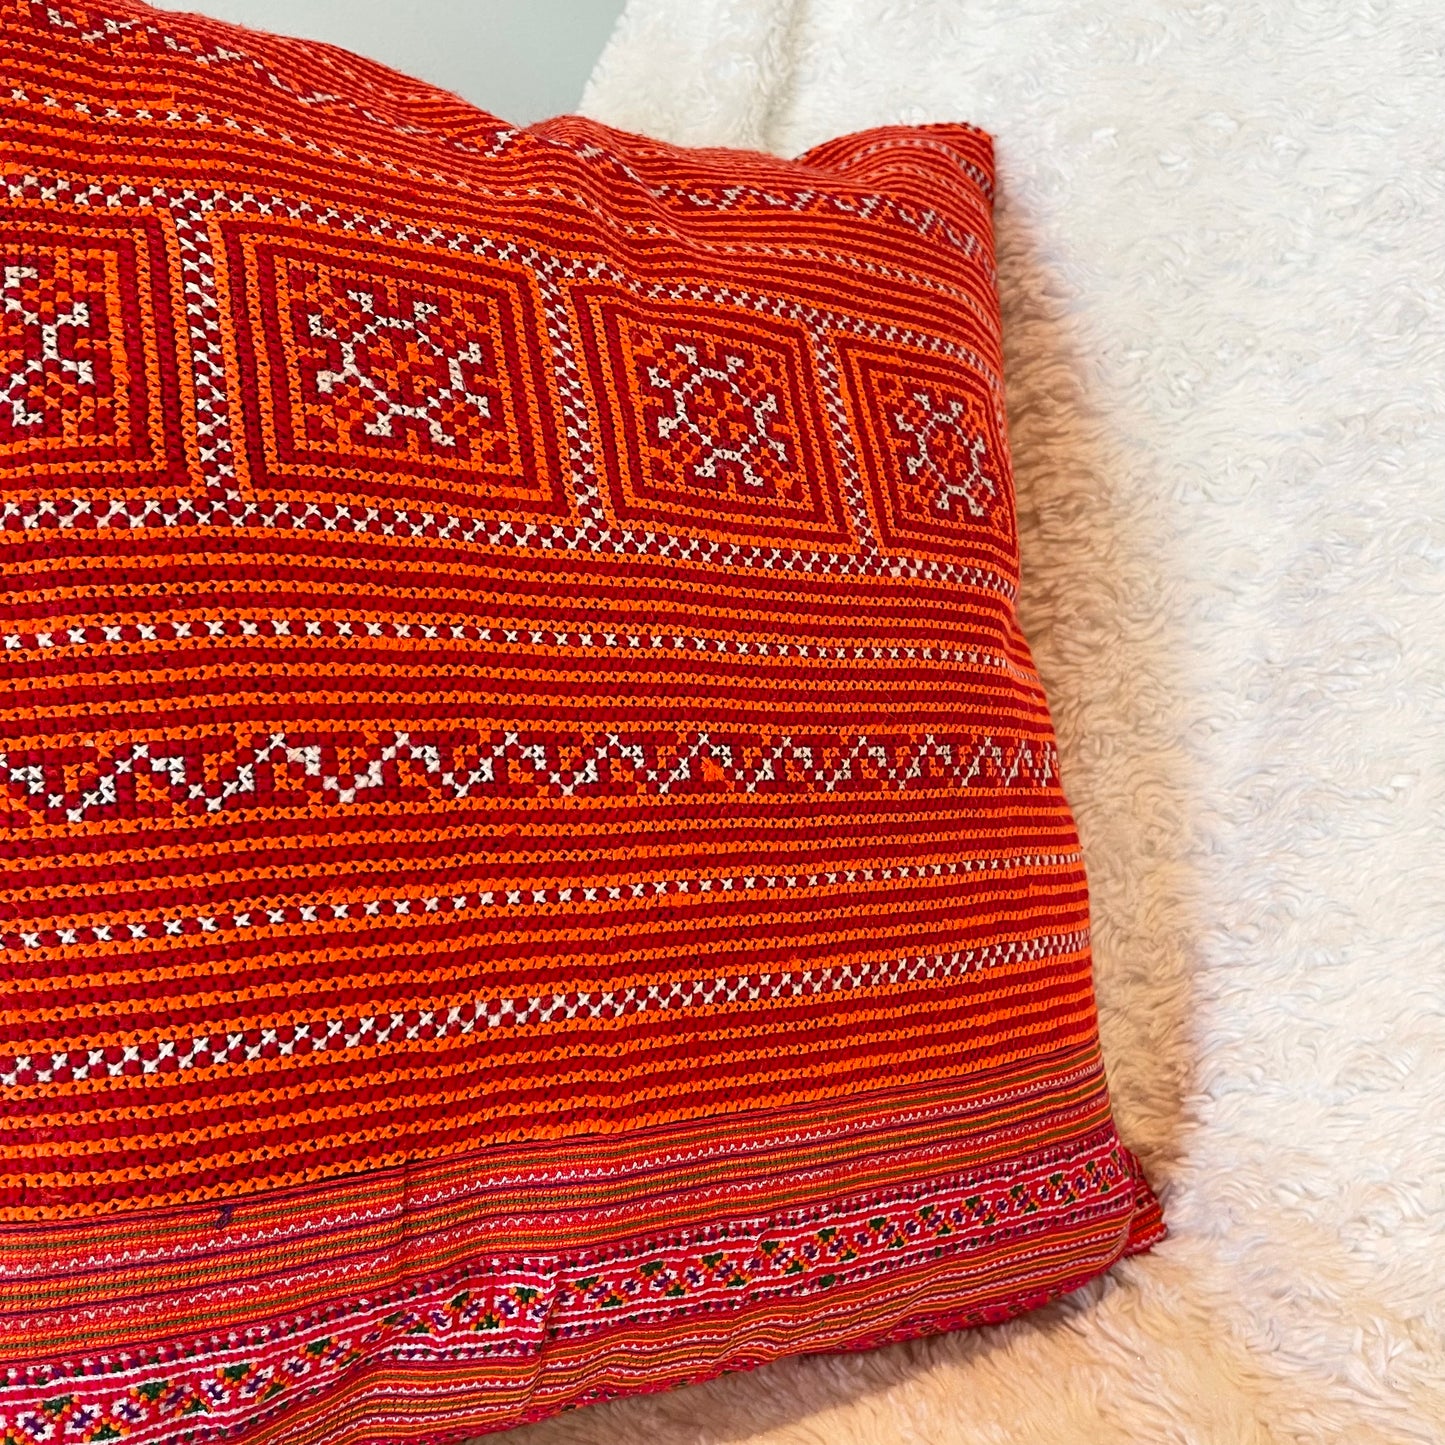 Cross-stitched embroidery cushion cover, handmade fabric, authentic tribal fabric